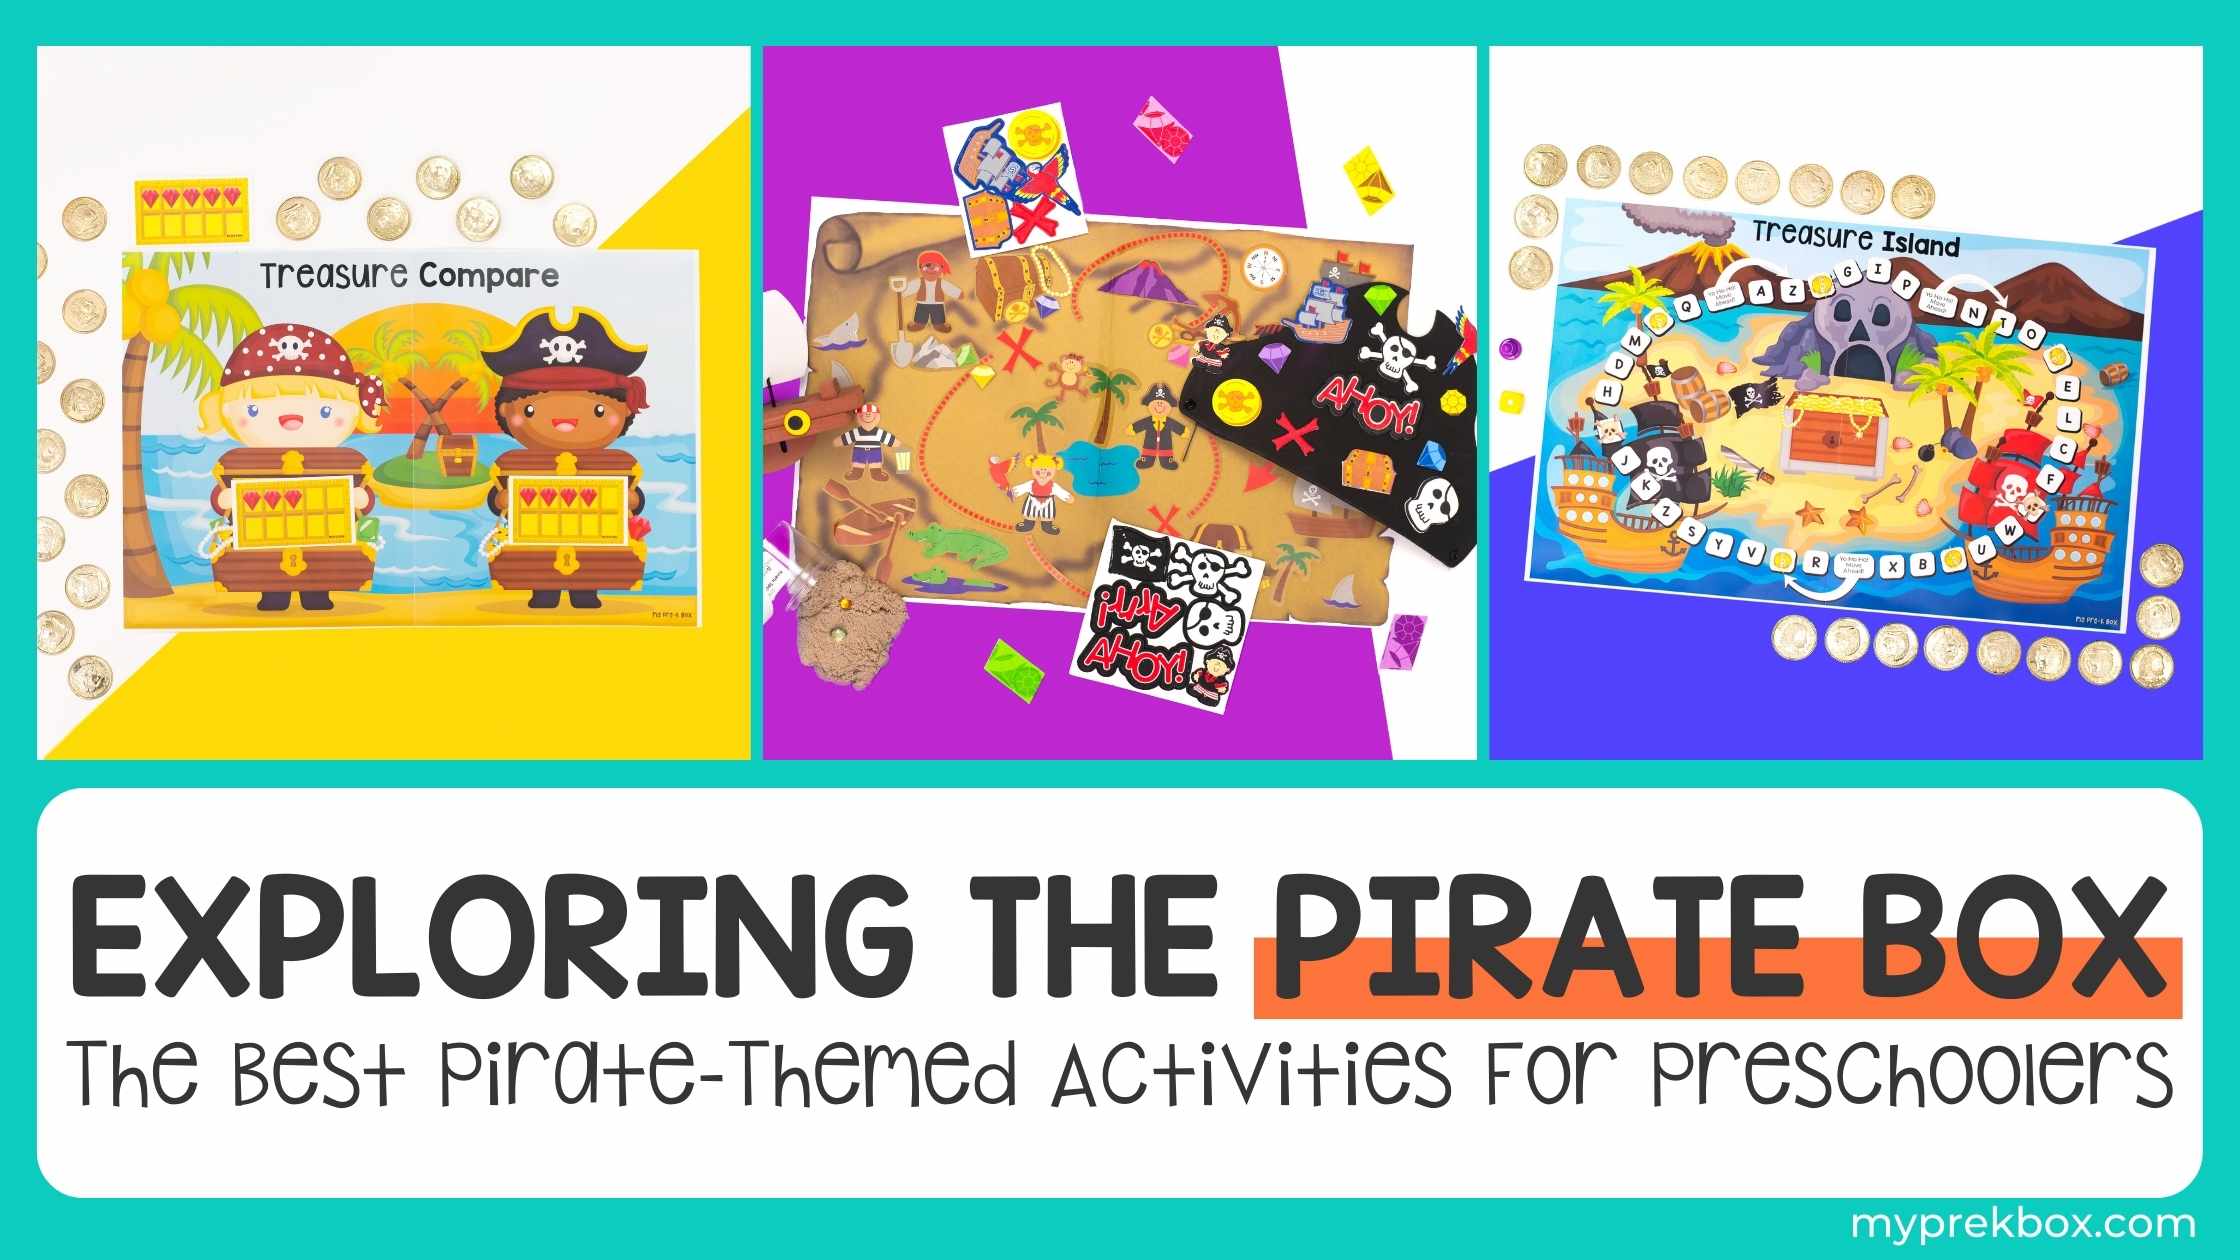 A Sneak Peek Inside the Pirate Box: The Best Pirate-Themed Activities For Preschoolers